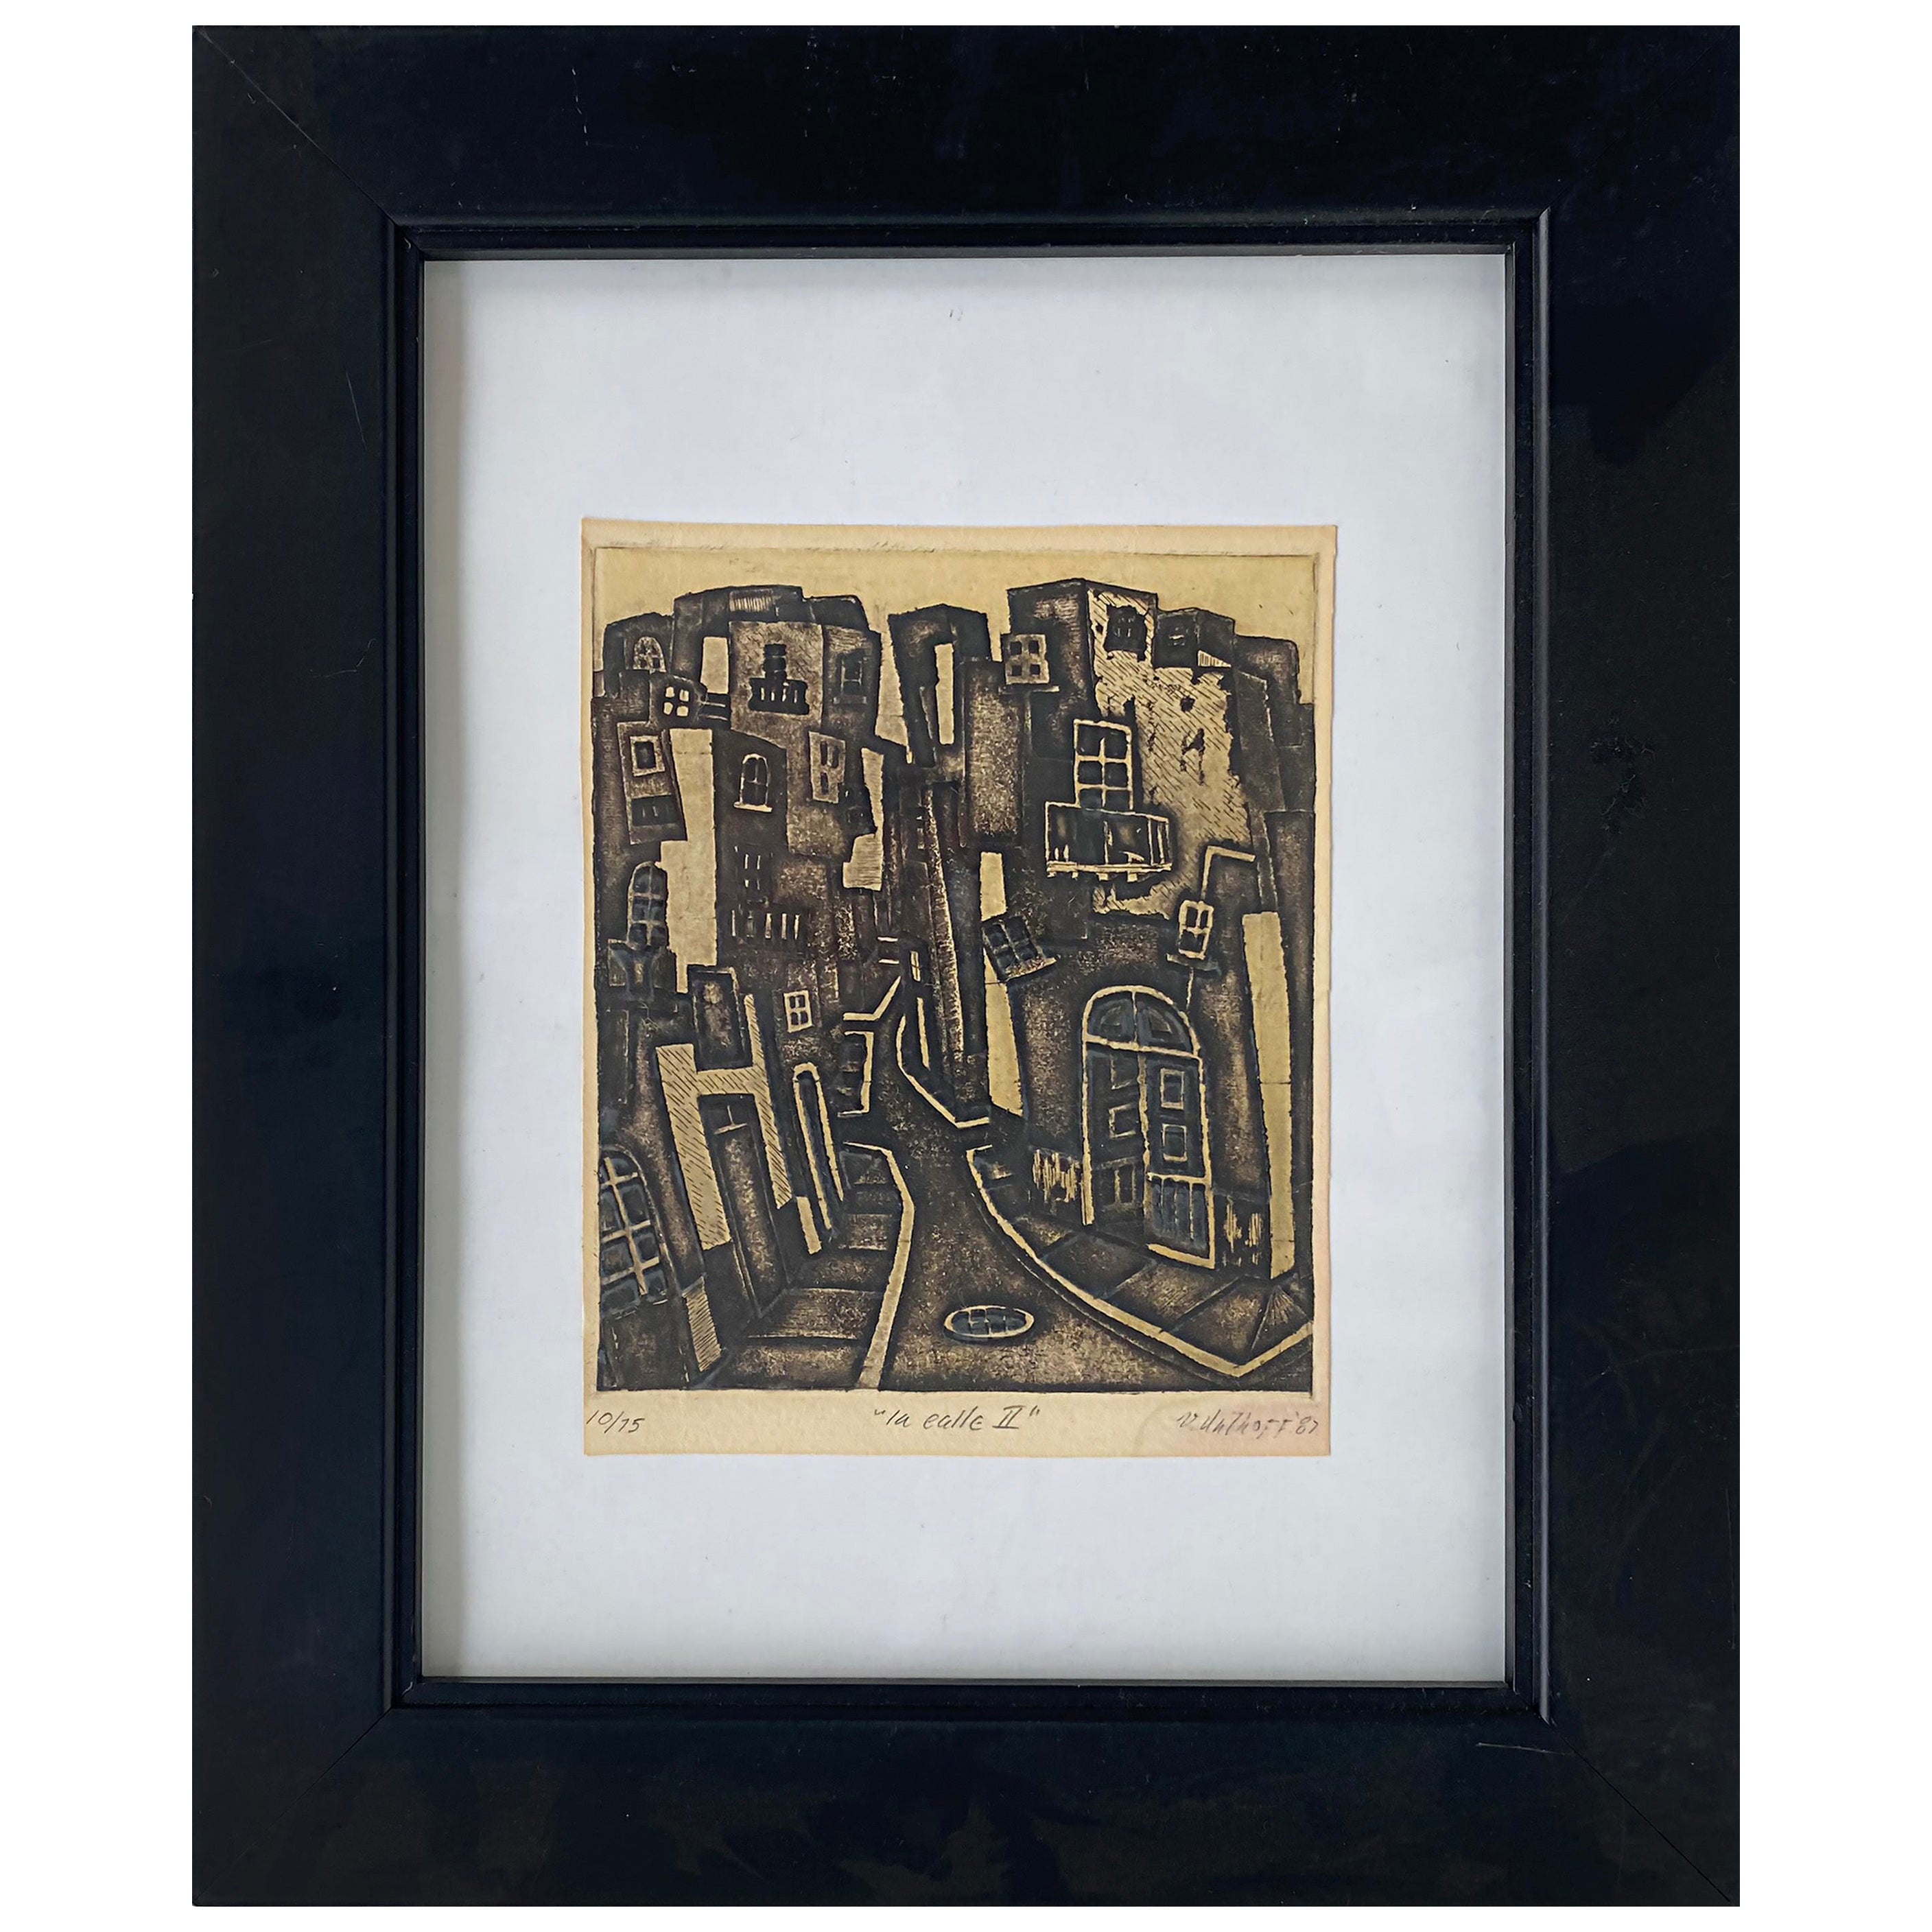 Woodblock Engraving “La Calle II" Signed, Numbered 10/75, 1987